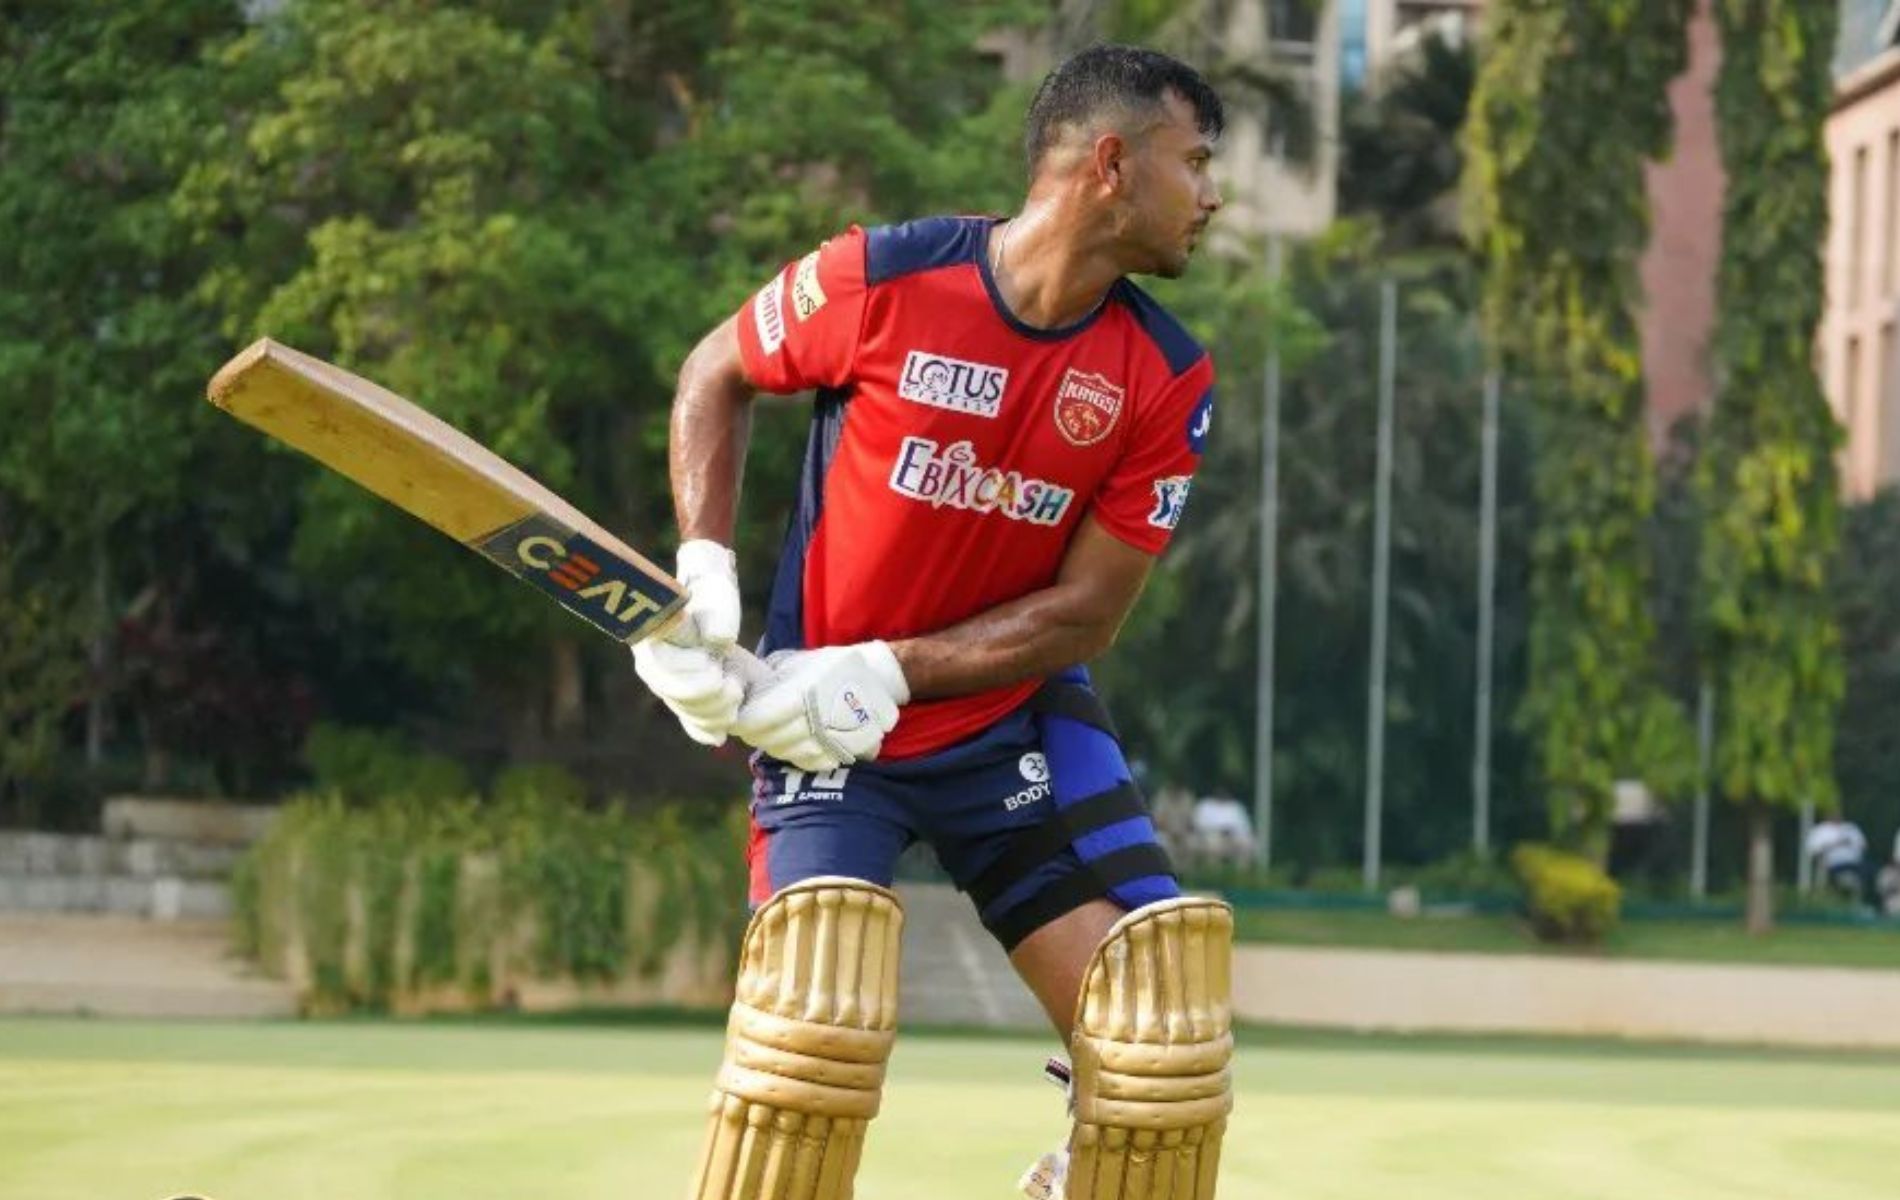 Mayank Agarwal was released by PBSK ahead of IPL 2023 auction. (Pic: Twitter)